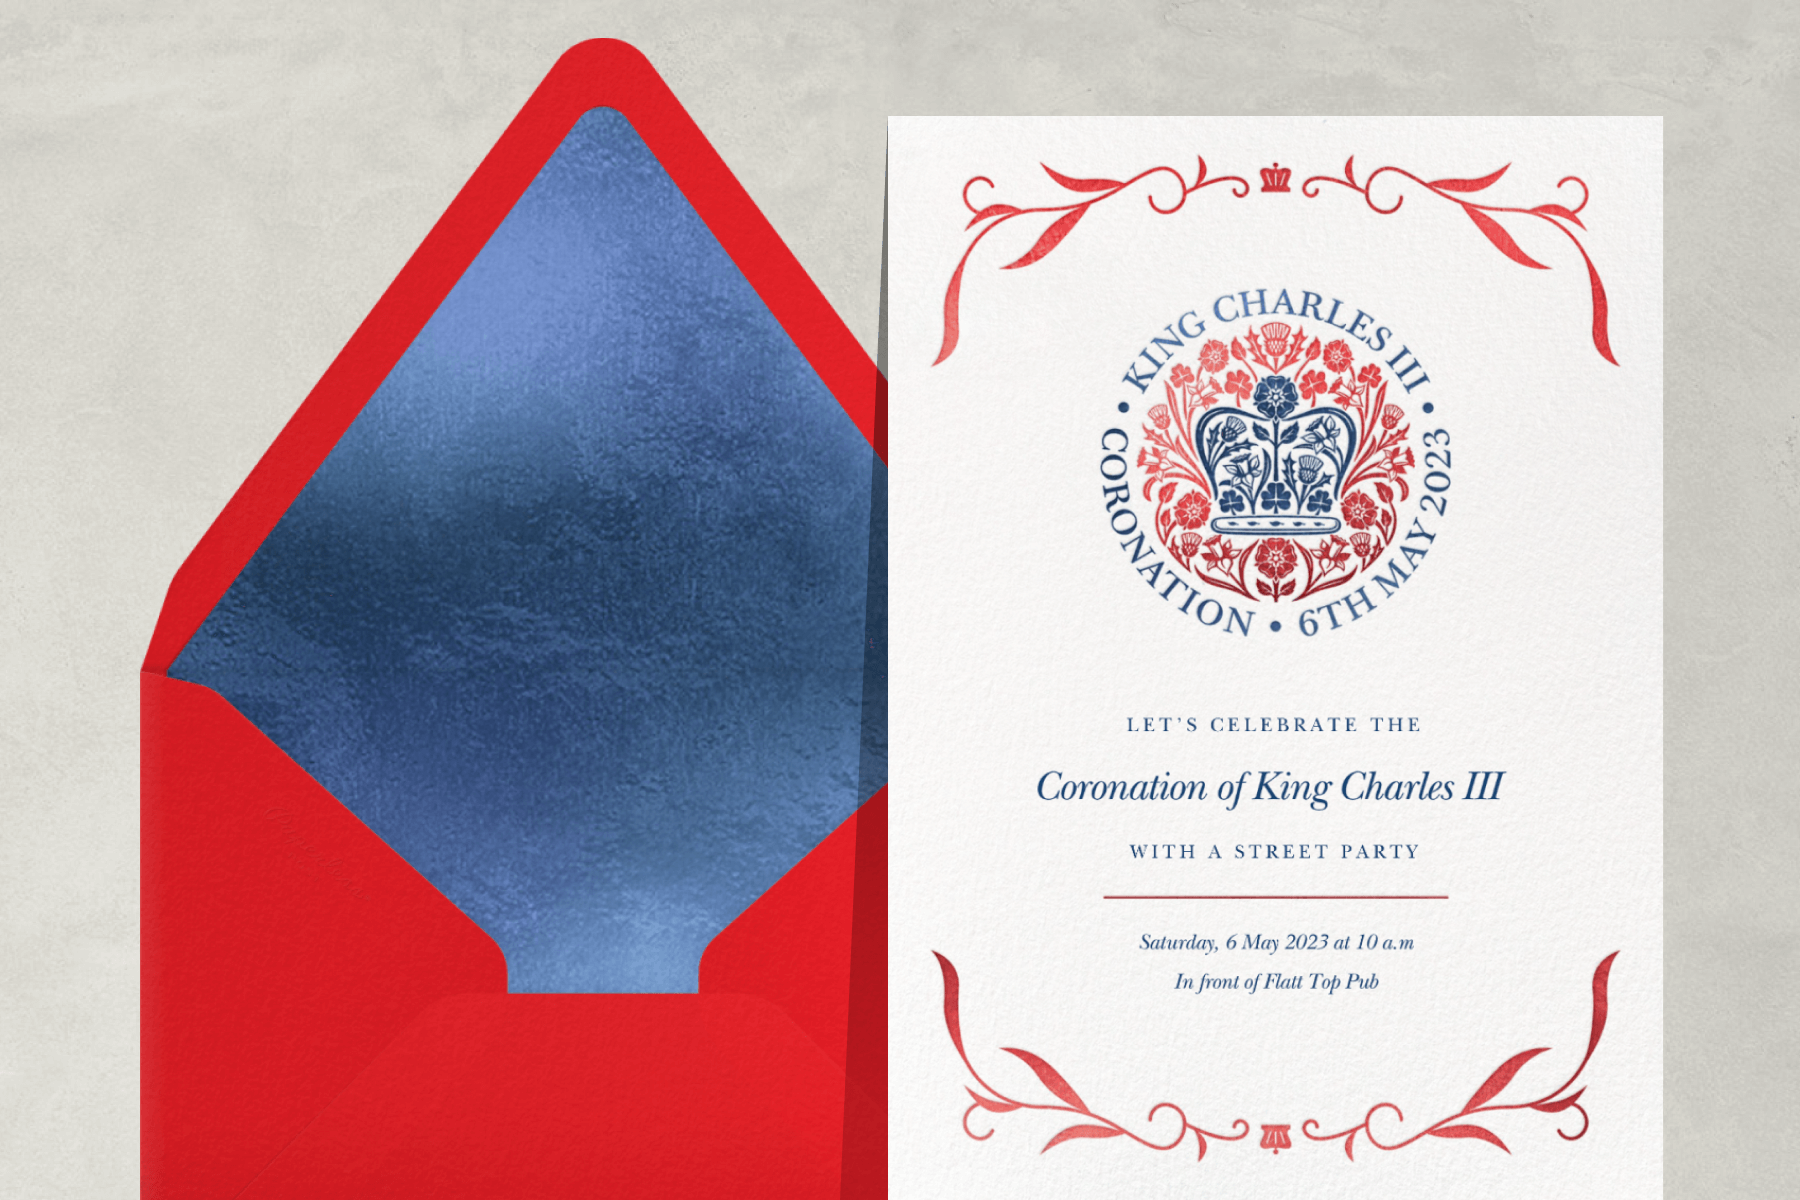 A Coronation party invitation with the official King Charles III Coronation seal and red motifs paired with a red and blue envelope.